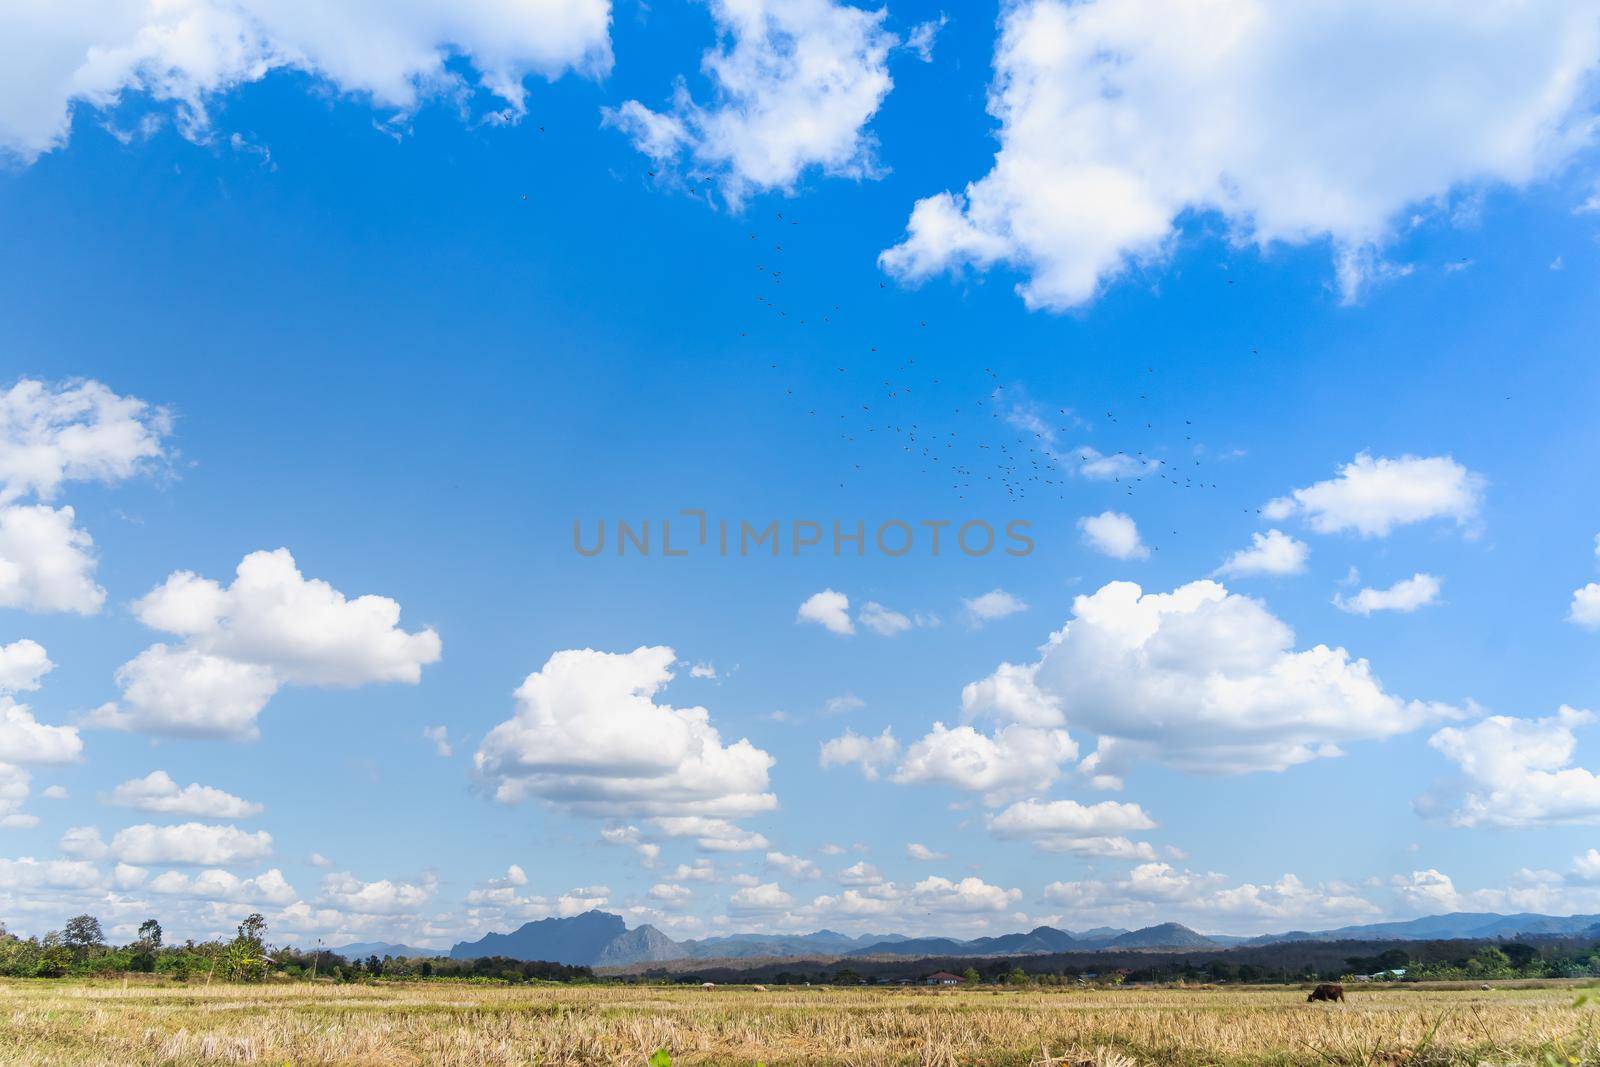 Summer blue sky clouds background. Beauty clear cloudy in sunshine calm bright winter air bacground. by Wmpix